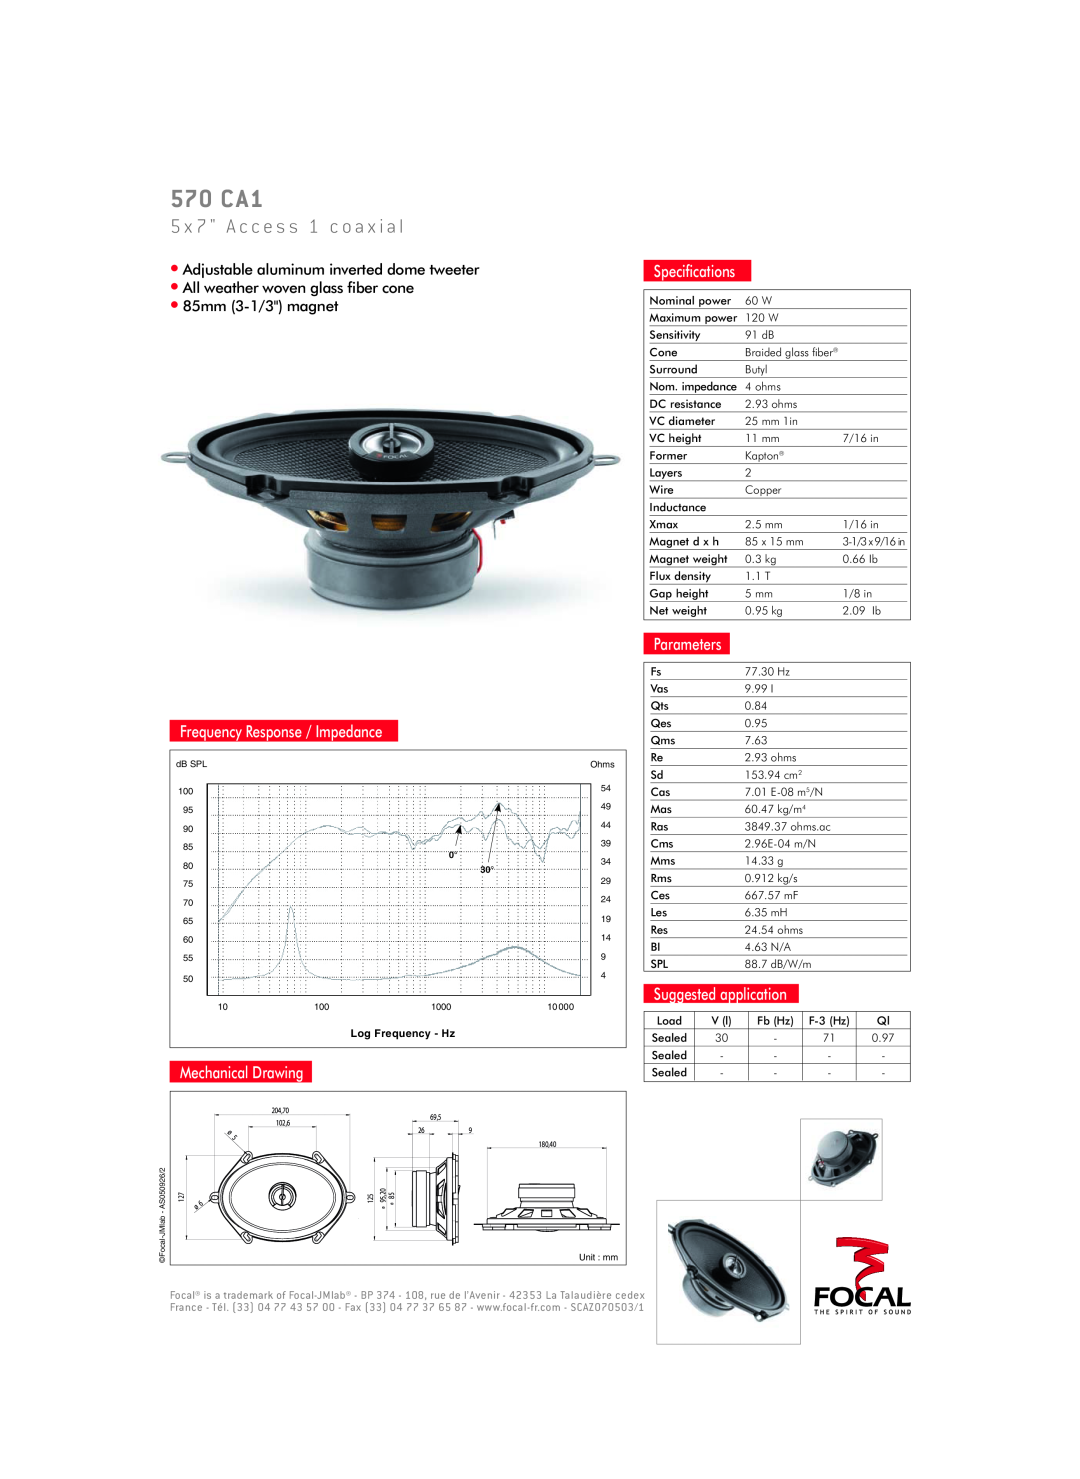 Focal 570 CA1 specifications 5 x 7 A c c e s s 1 c o a x i a l, Parameters, Frequency Response / Impedance, Speciﬁcations 